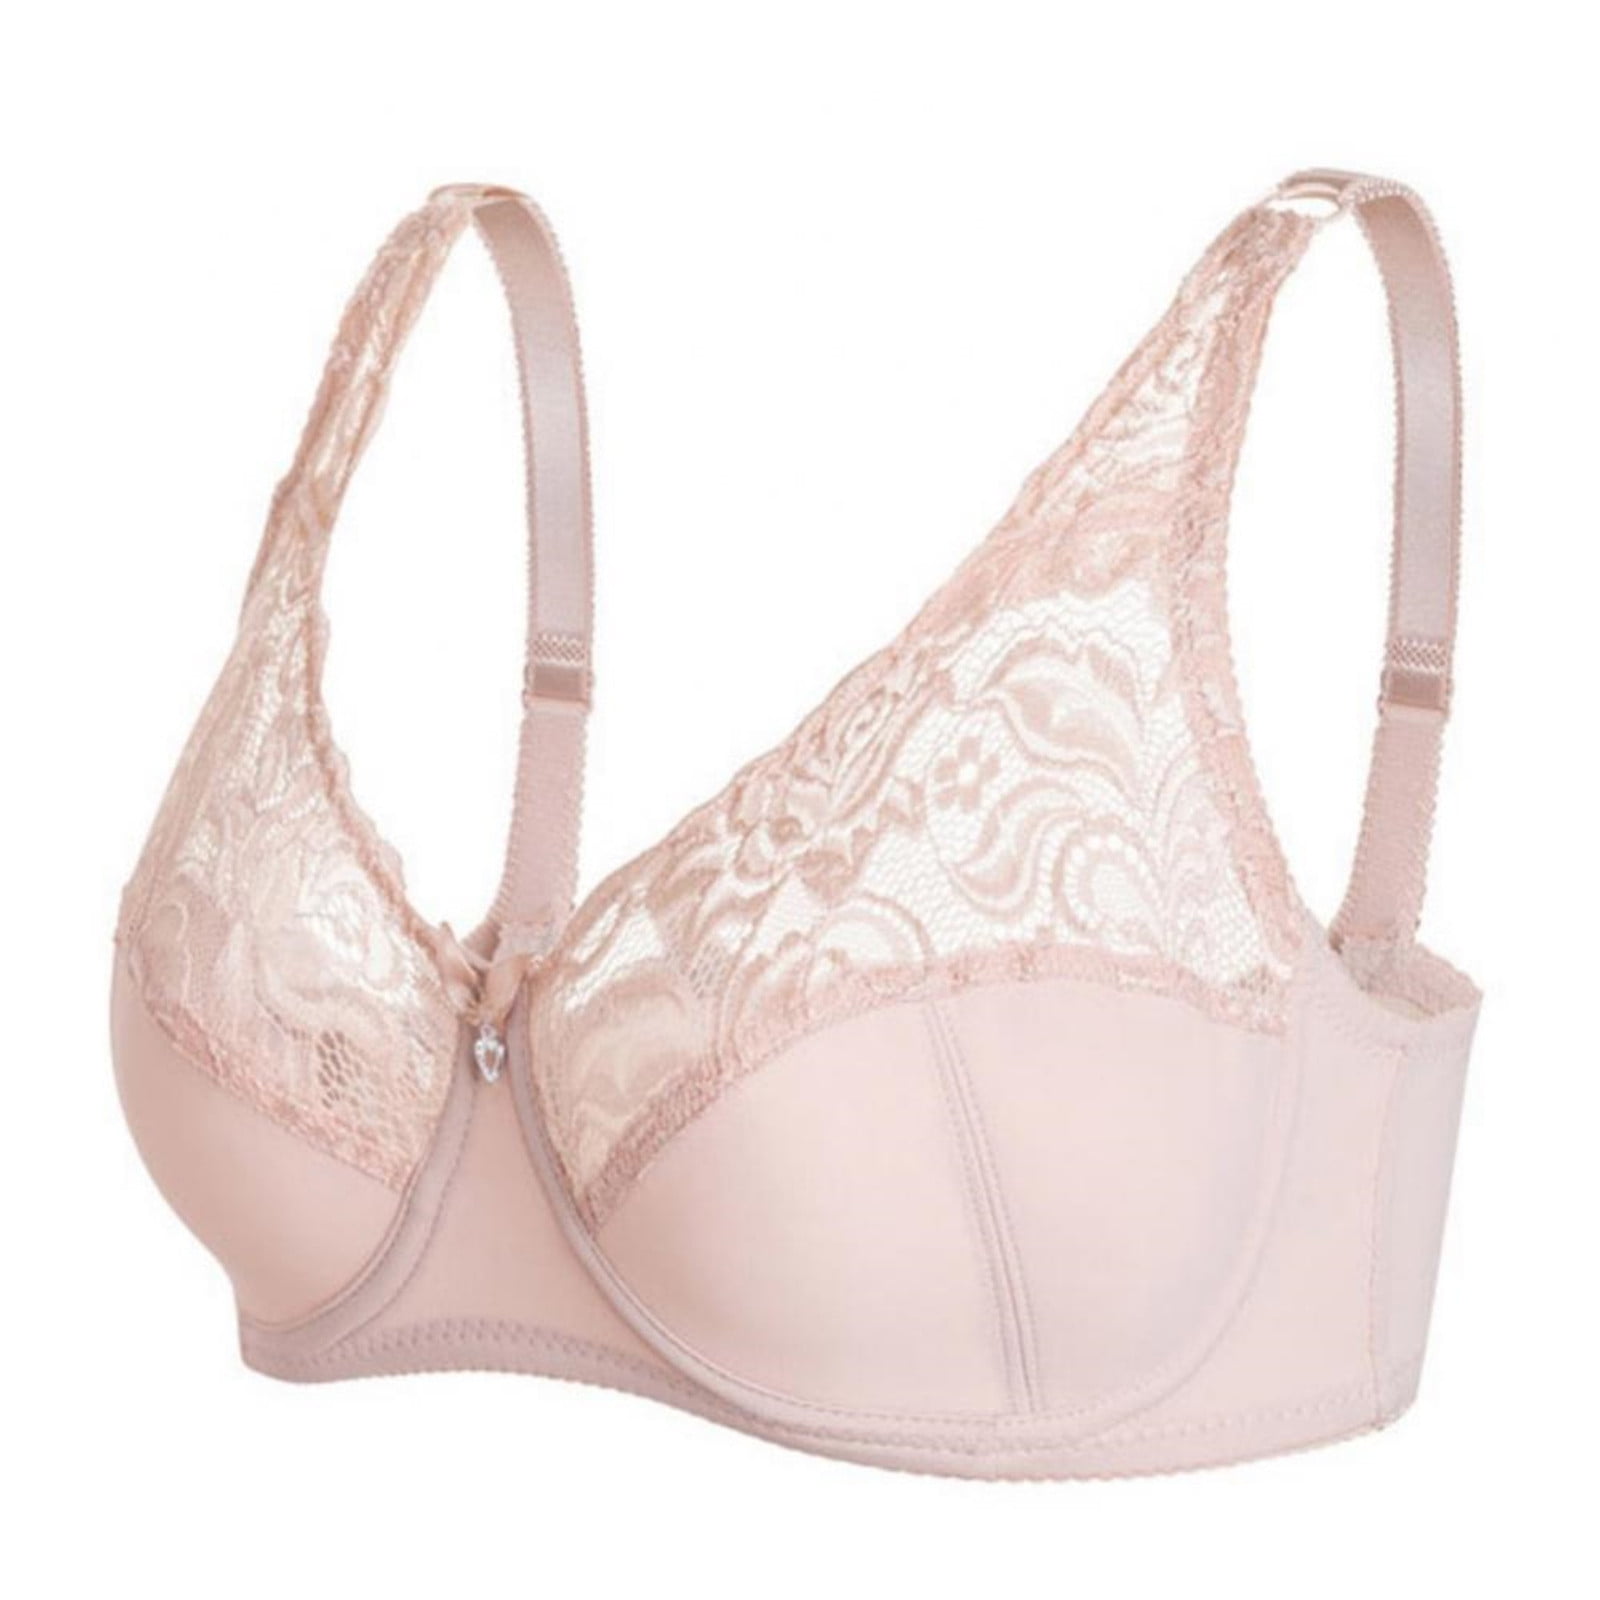 Marks & Spencer Body Non Wired Bra 42D Nude A39 P475 - AbuMaizar Dental  Roots Clinic